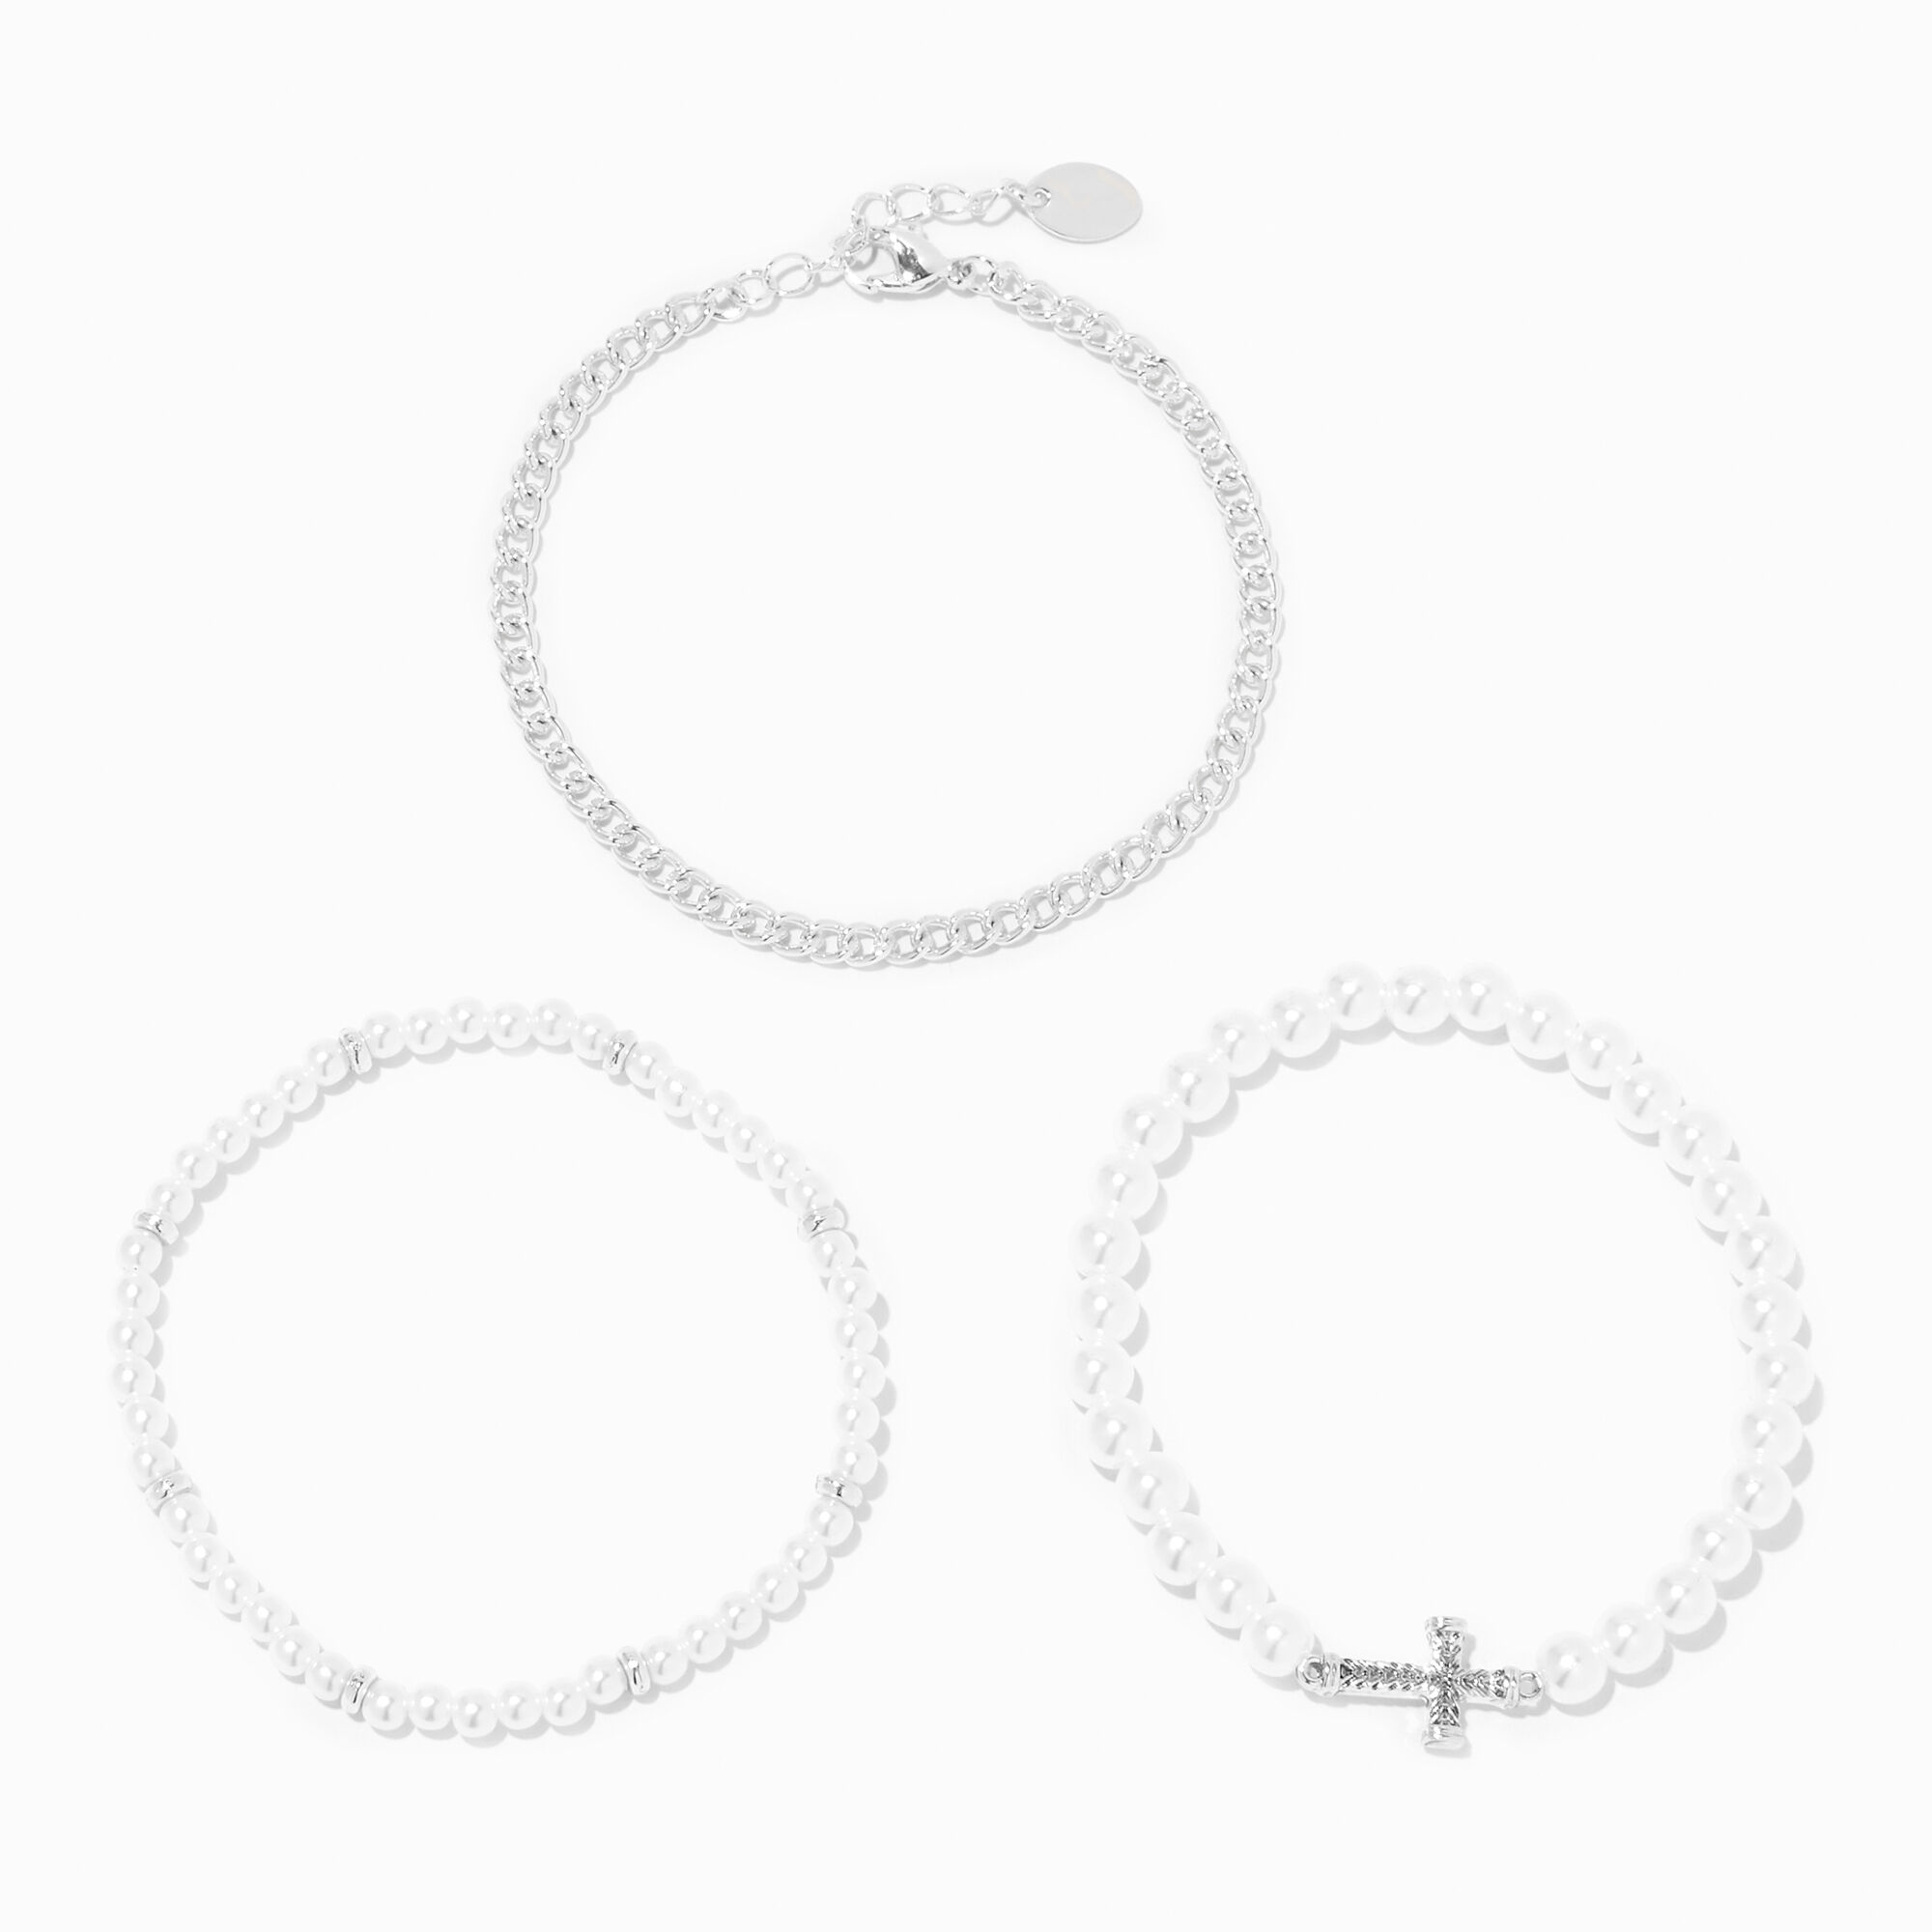 View Claires Pearl Beaded Cross Bracelet Set 3 Pack White information